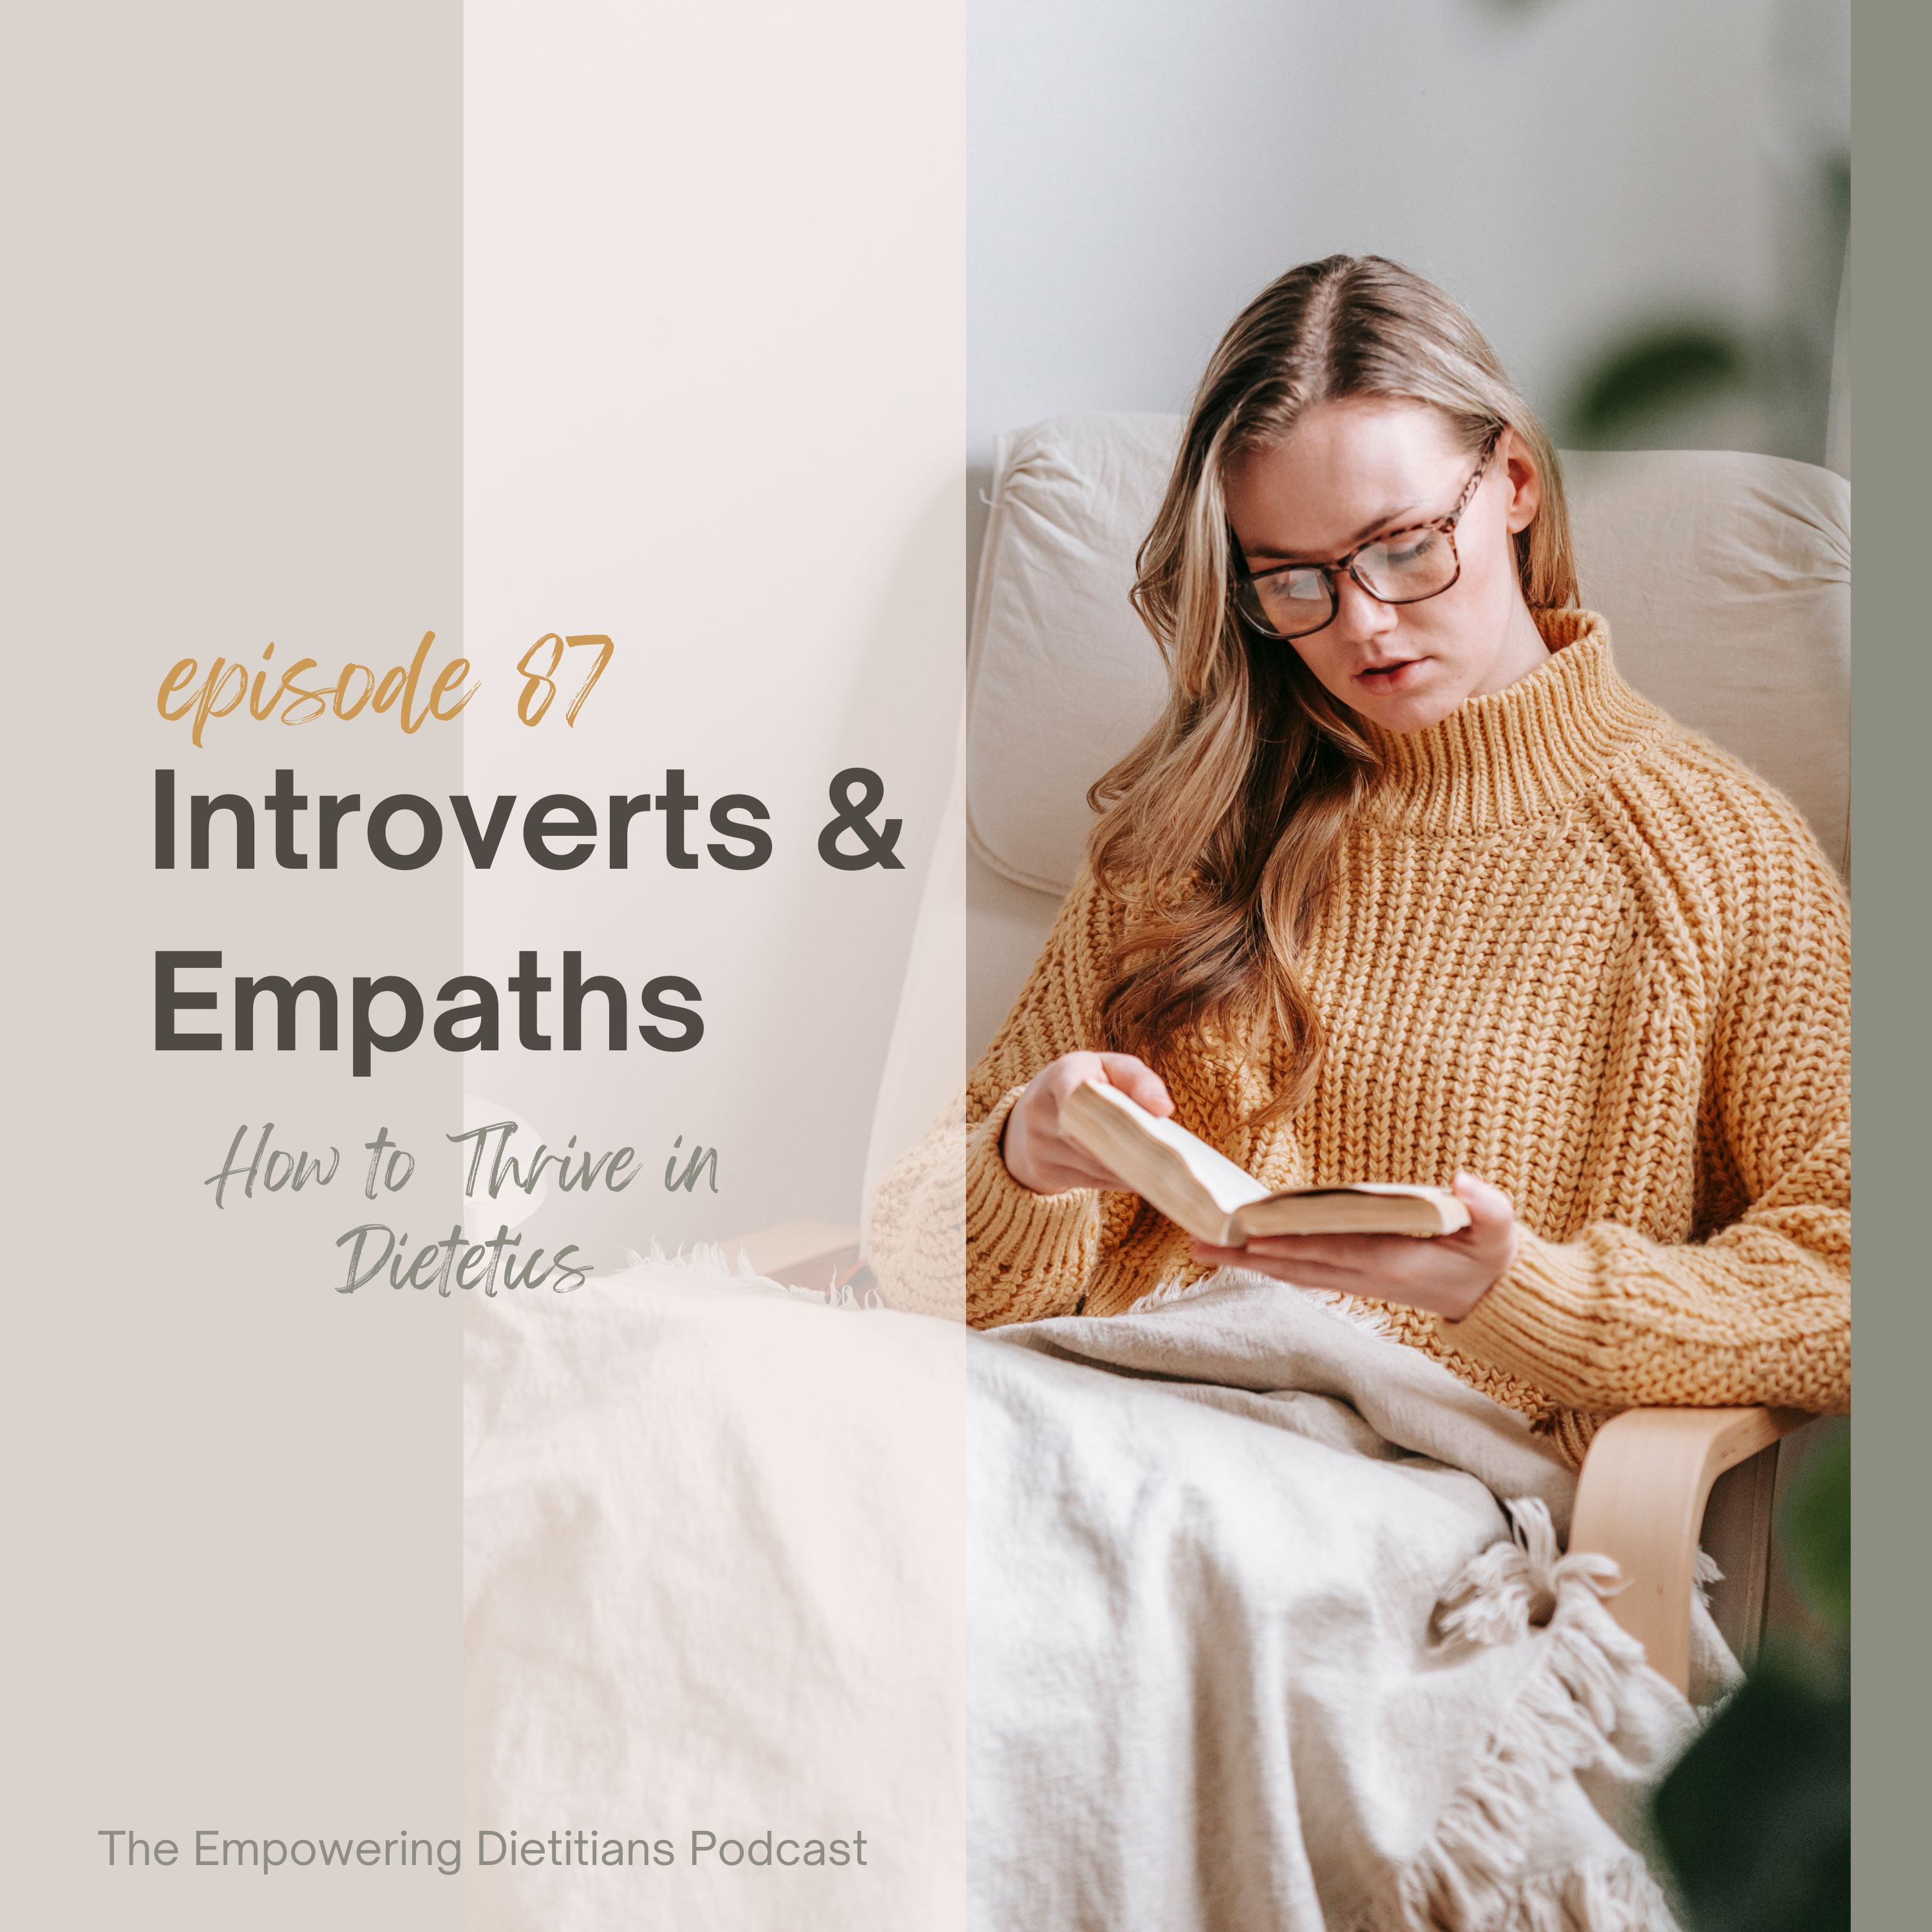 introverts and empaths - how to thrive in dietetics